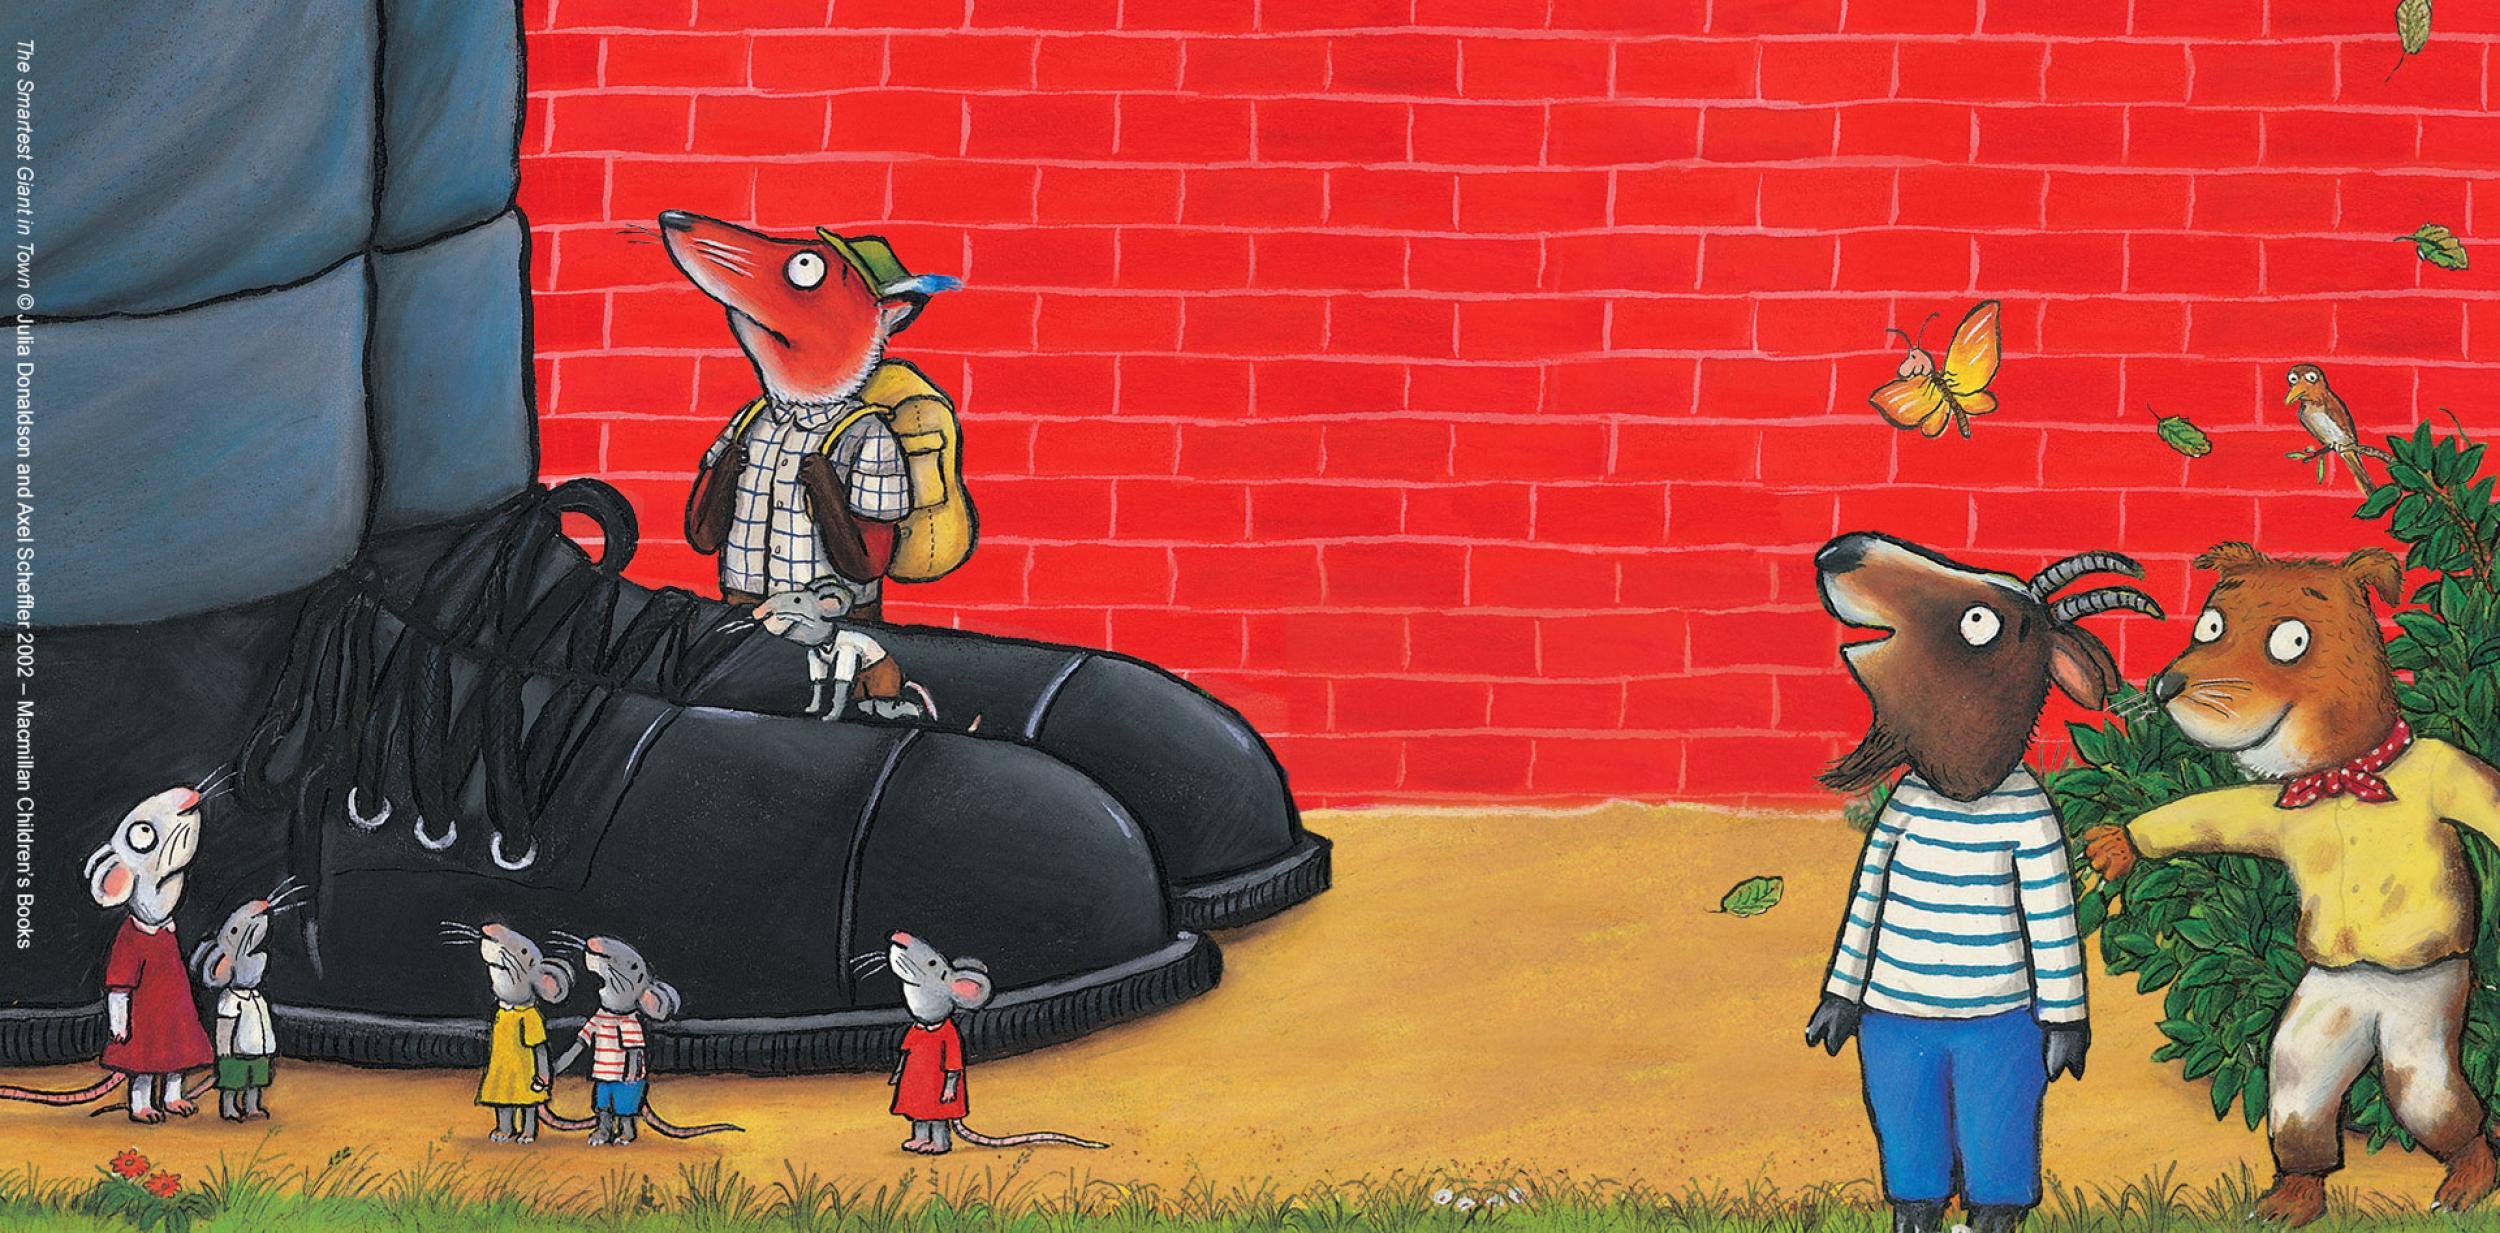 Children's illustration of animals looking up at a giant pair of shoes